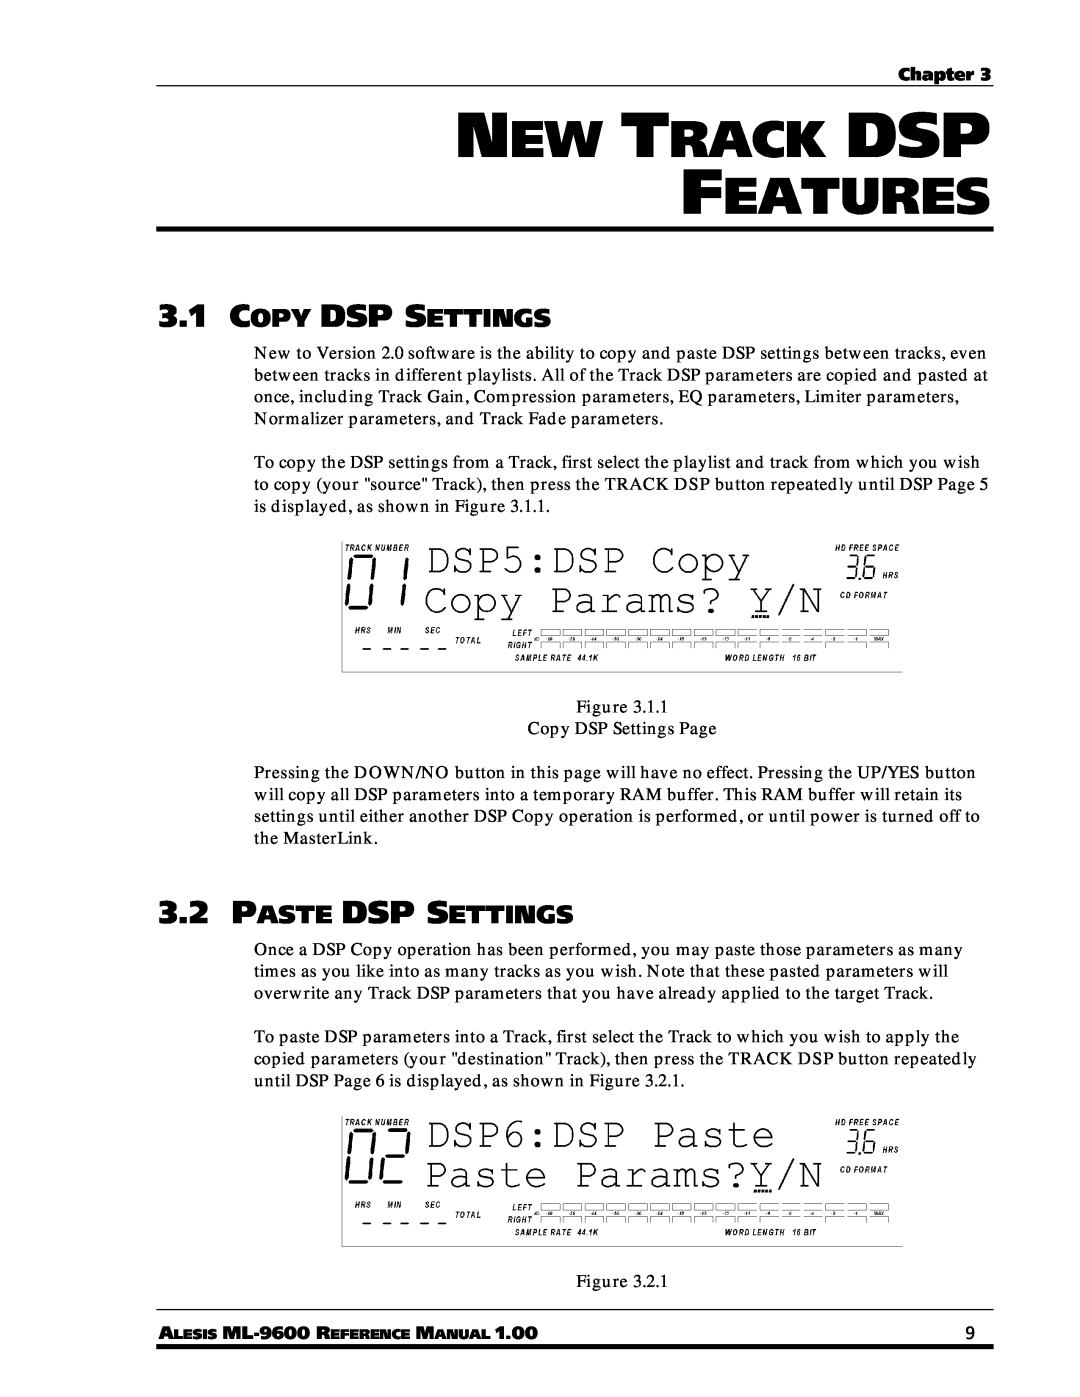 Alesis ML-9600 owner manual New Track Dsp Features, 3.1COPY DSP SETTINGS, 3.2PASTE DSP SETTINGS 